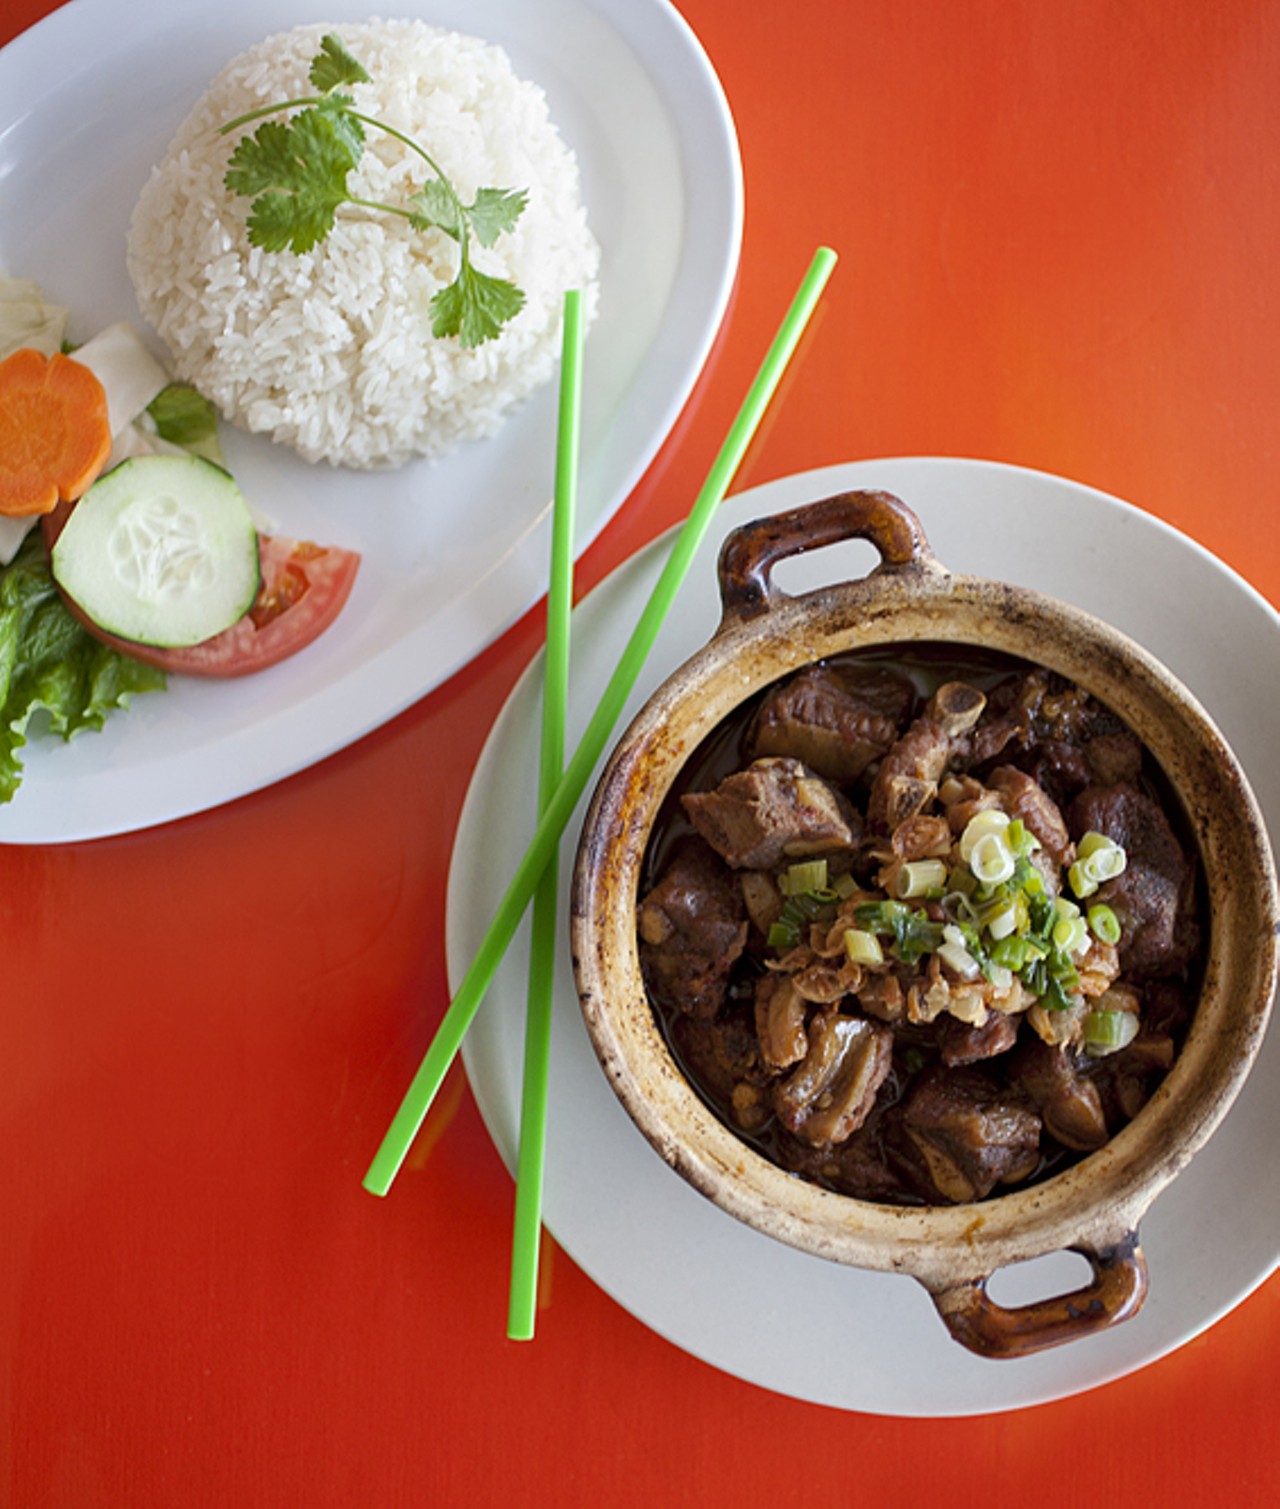 Suron rim man is a spicy and salty spare rib dish in a clay pot.